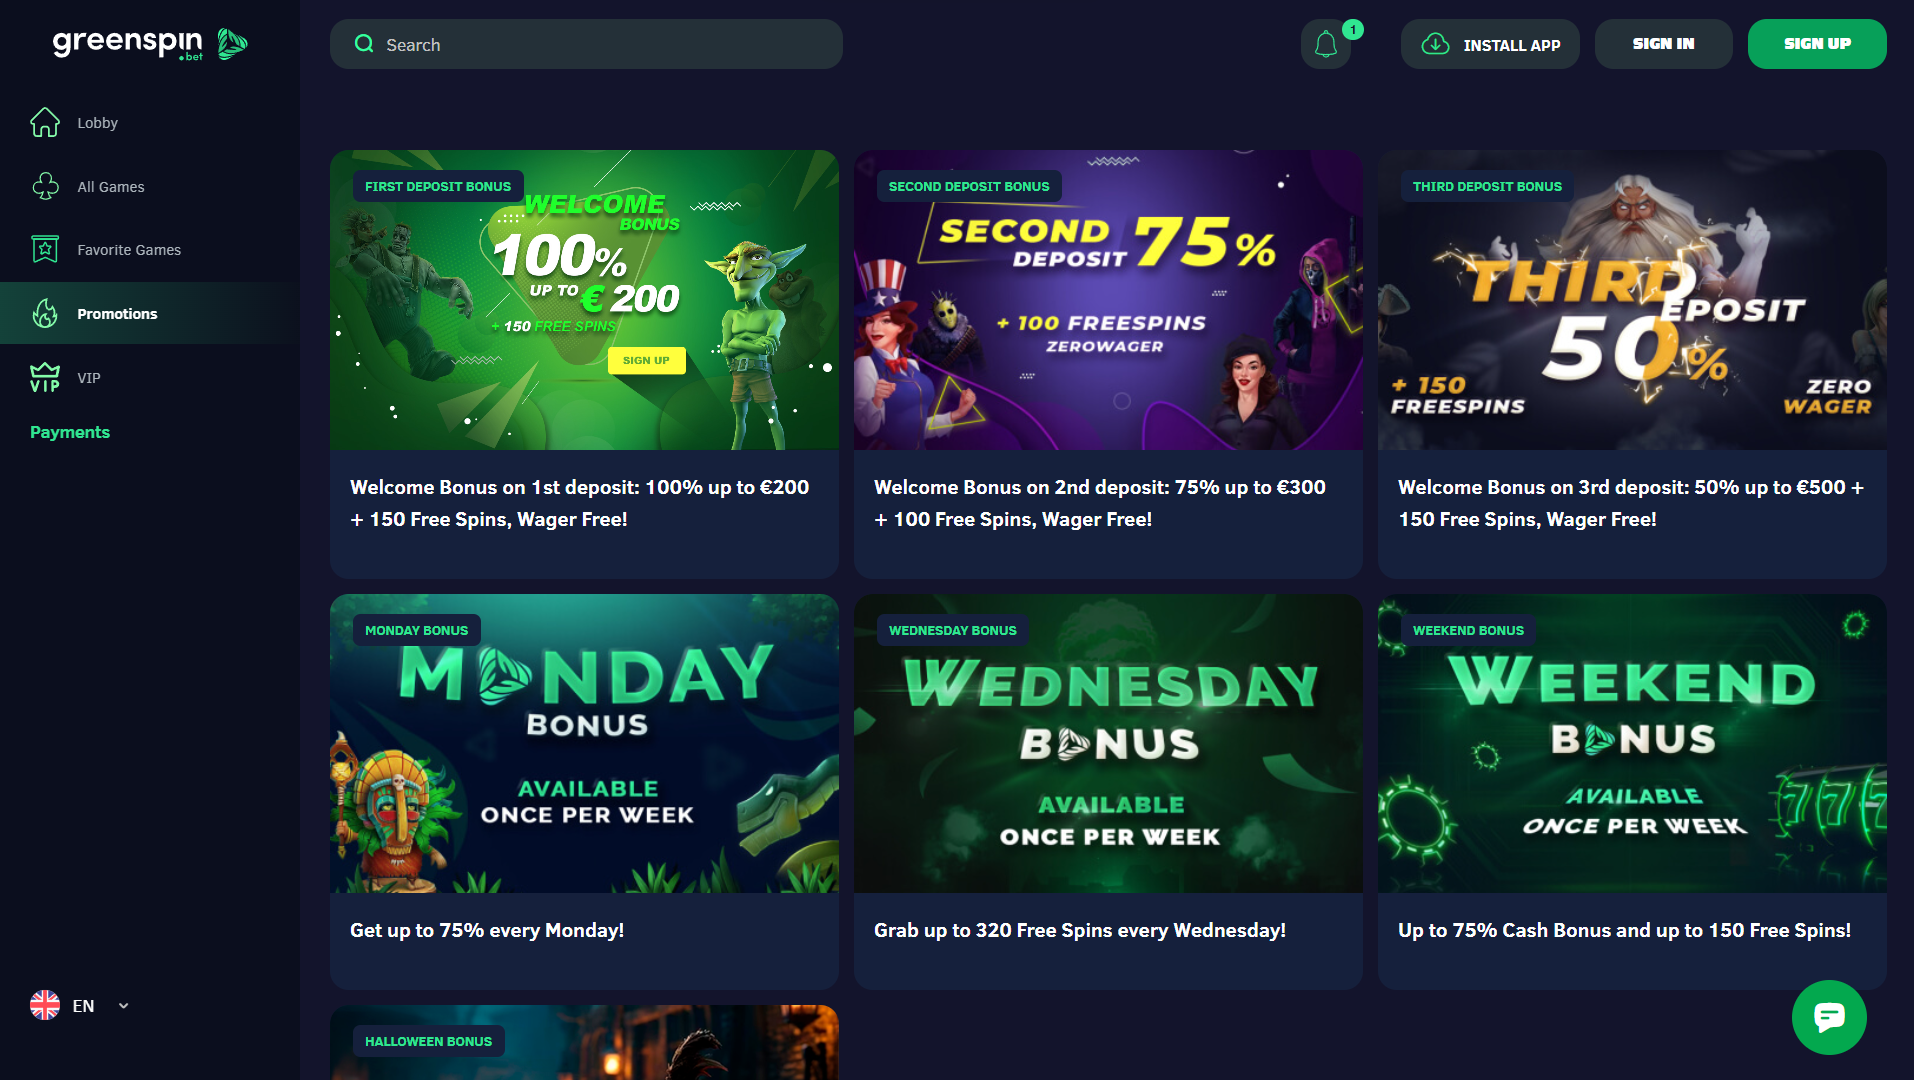 Greenspin Casino Promotions